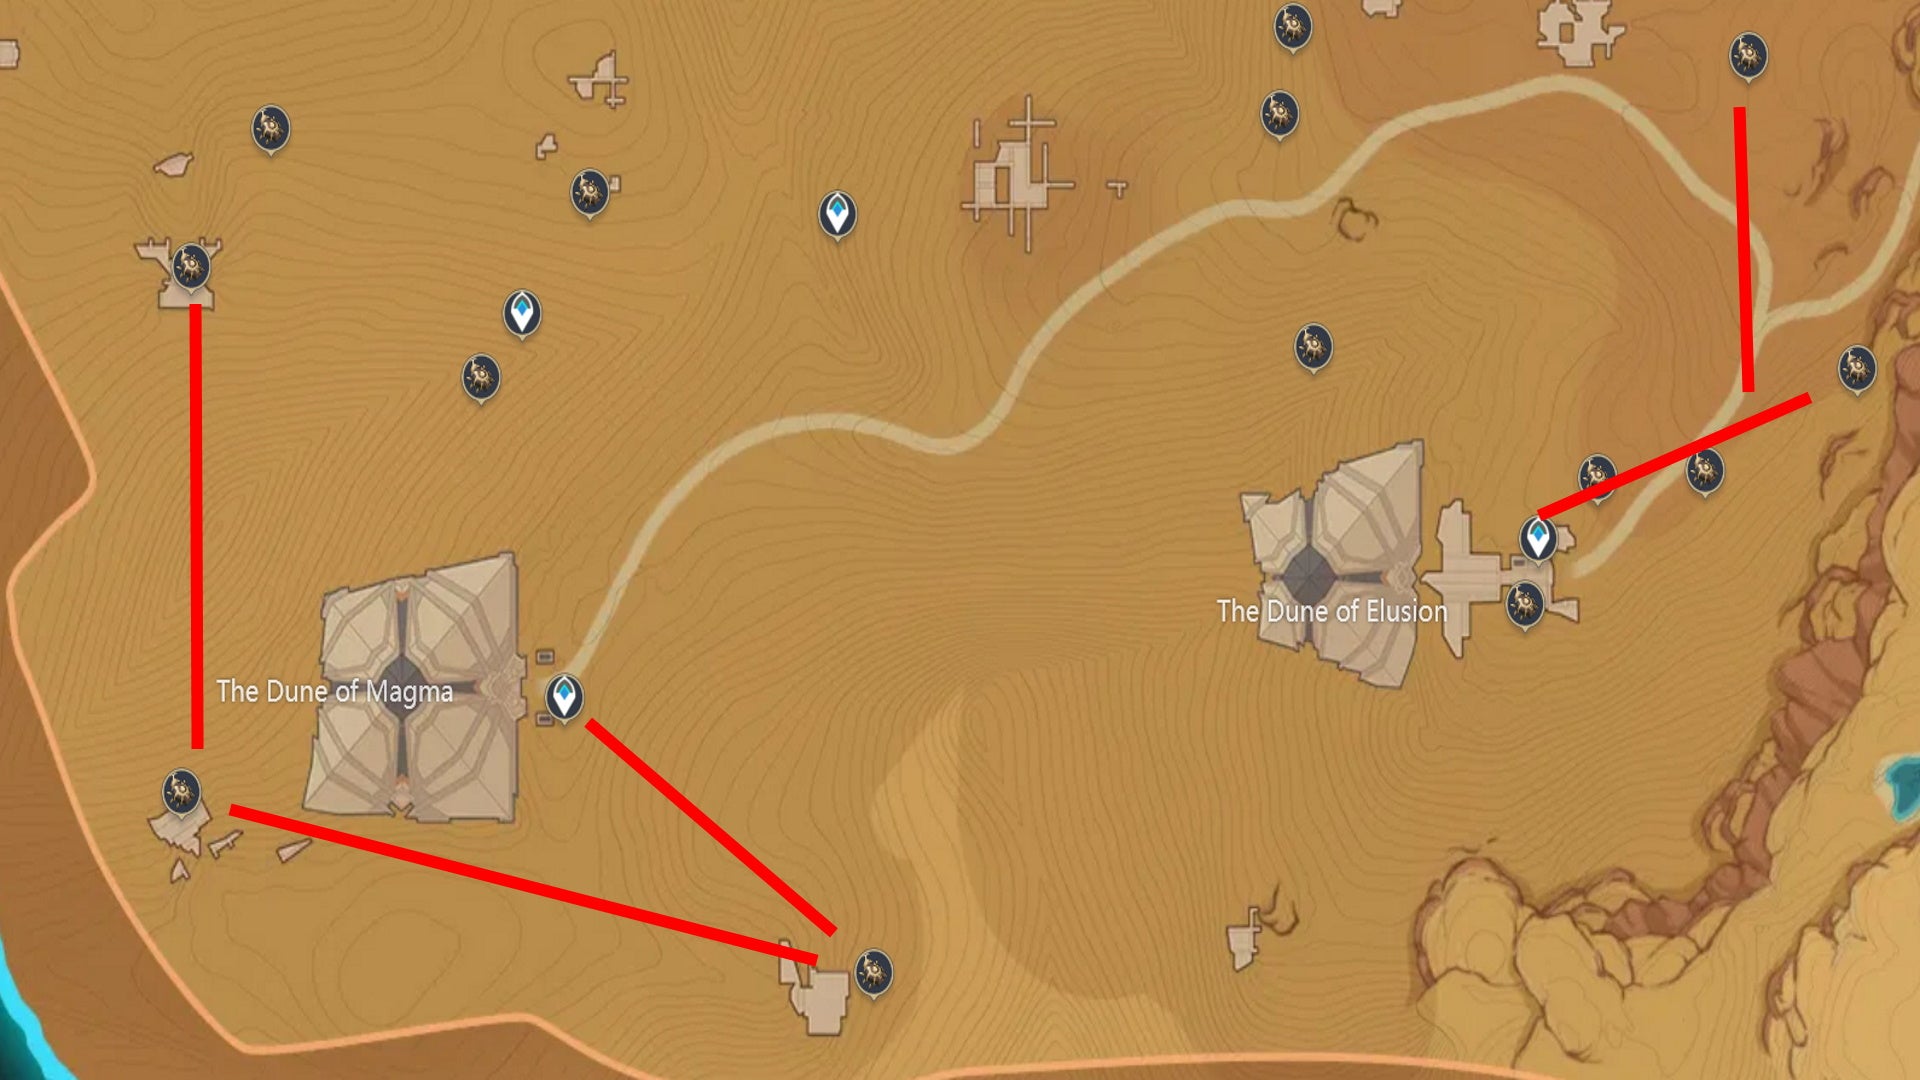 Genshin Impact Scarab locations: A map showing scarab farm routes near Dune of Elusion